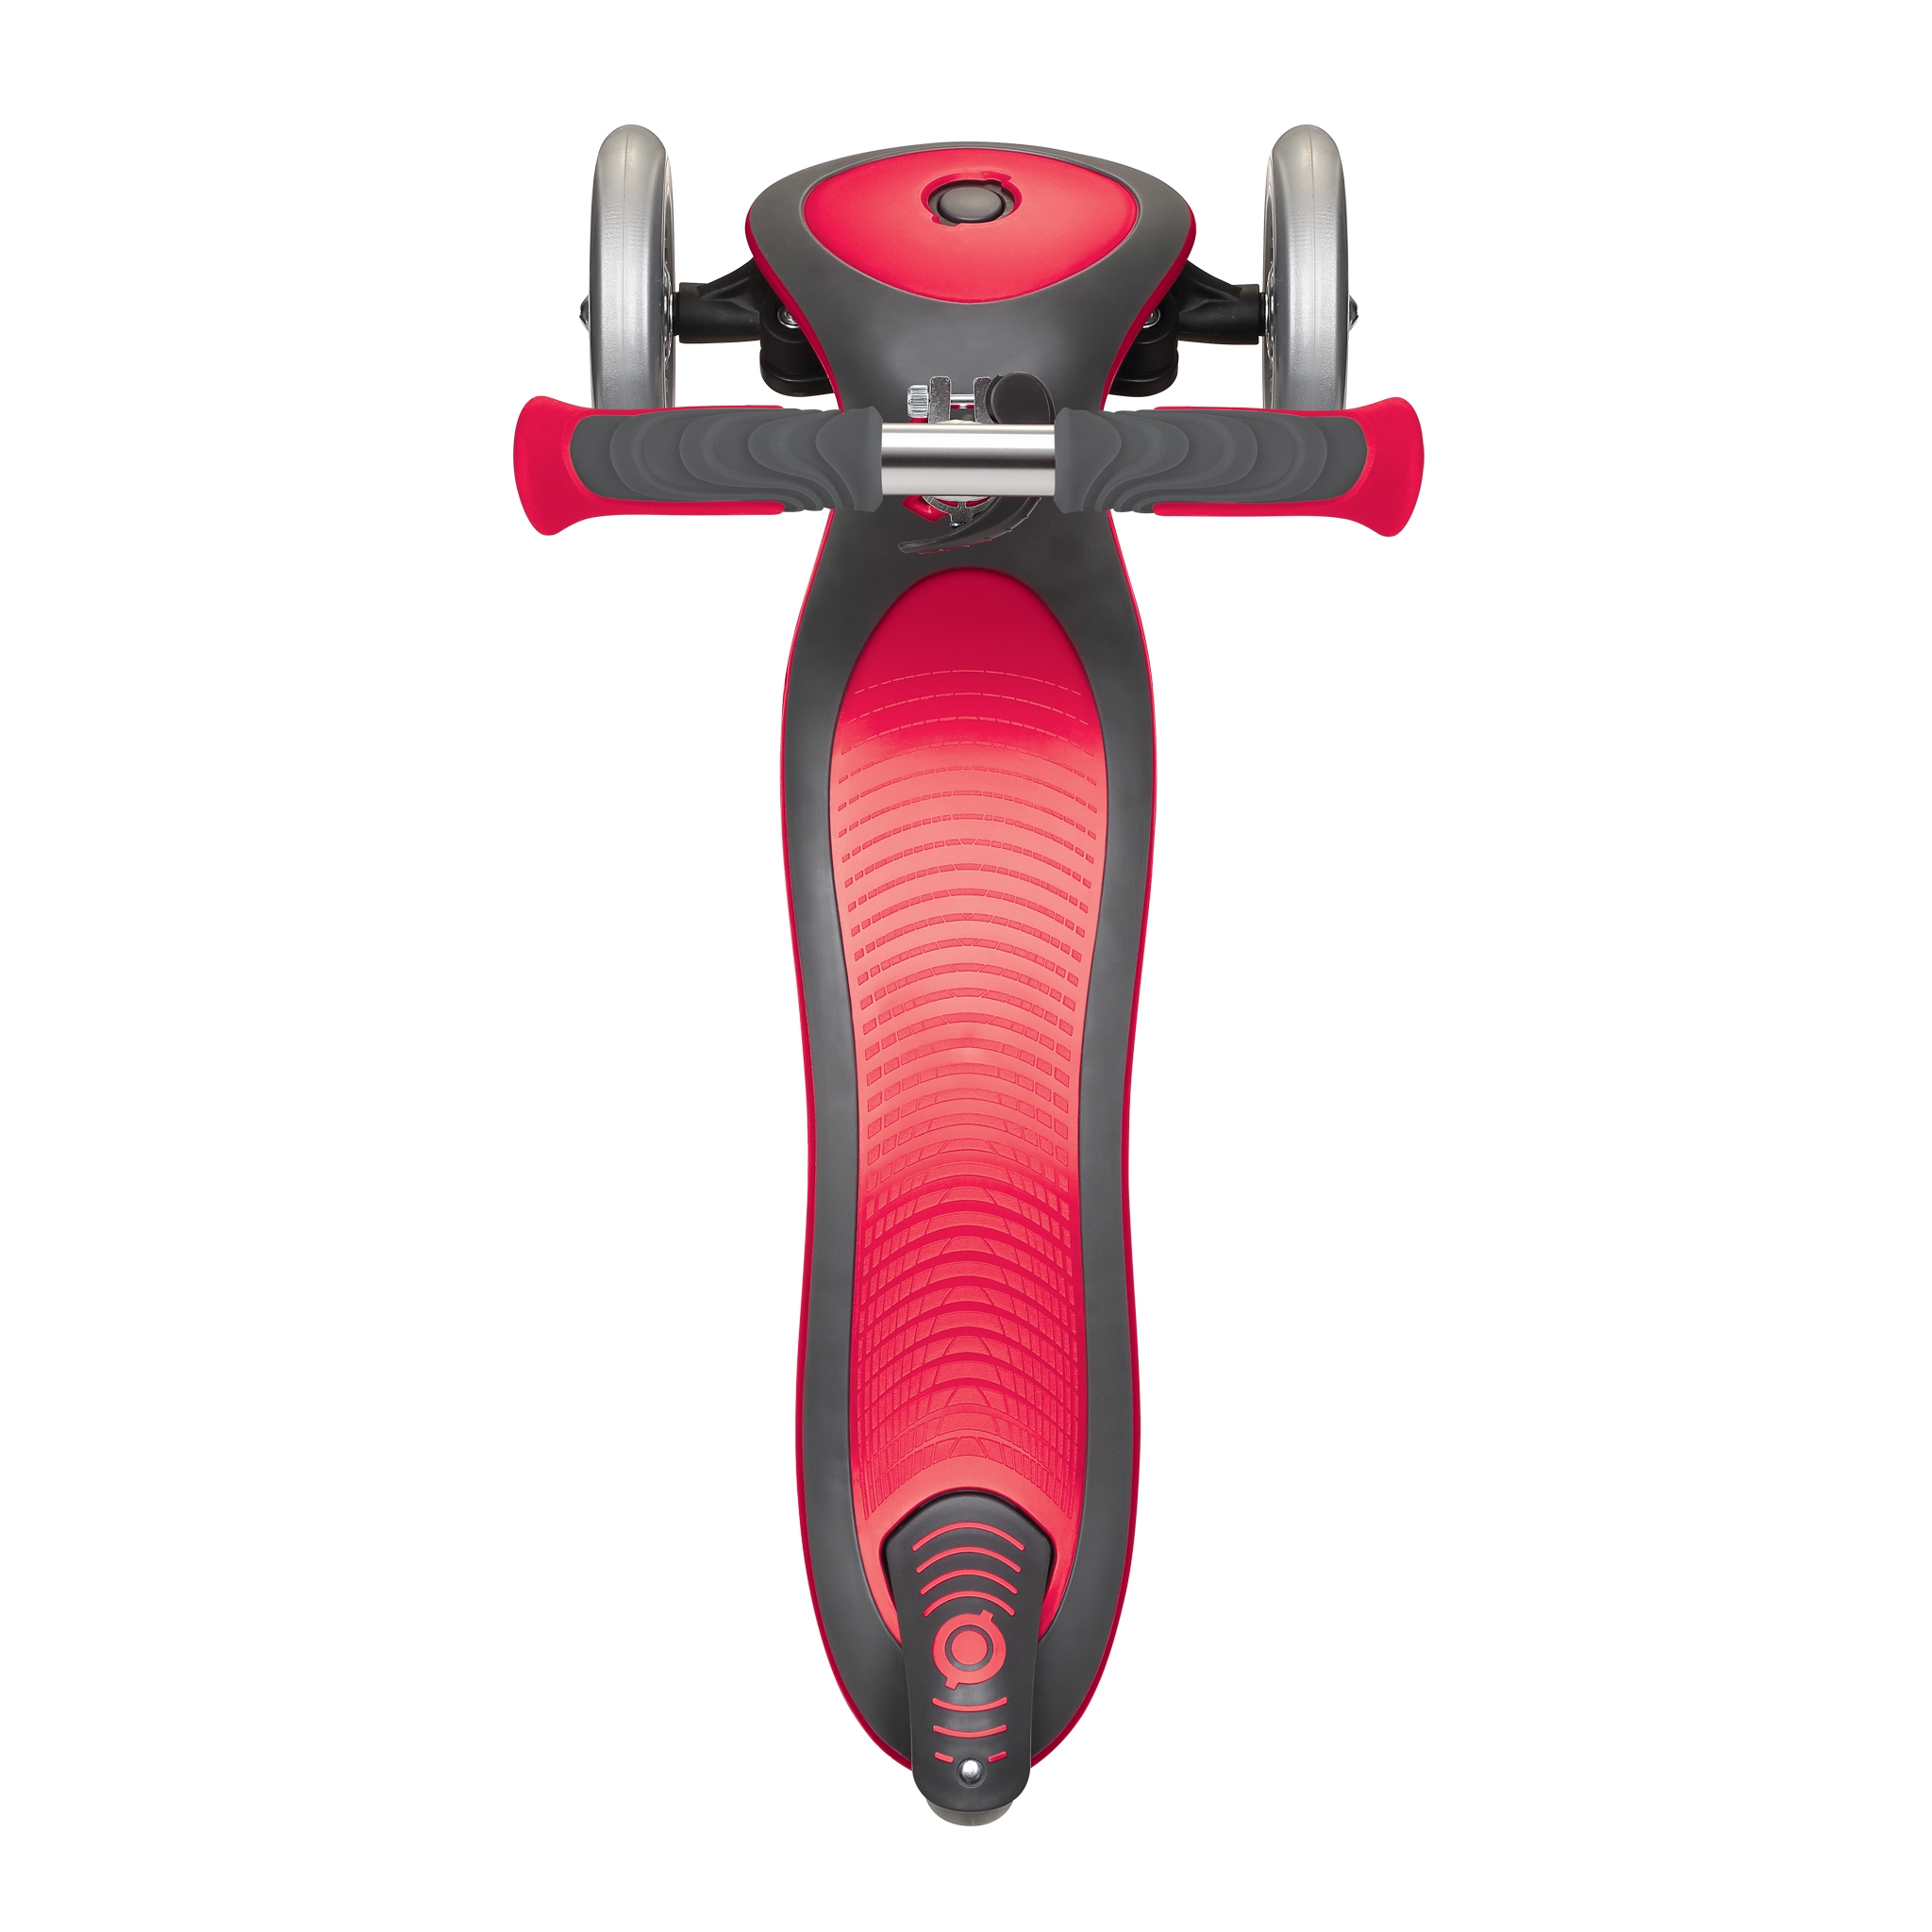 Globber-ELITE-DELUXE-3-wheel-foldable-scooter-for-kids-with-extra-wide-scooter-deck-new-red 4